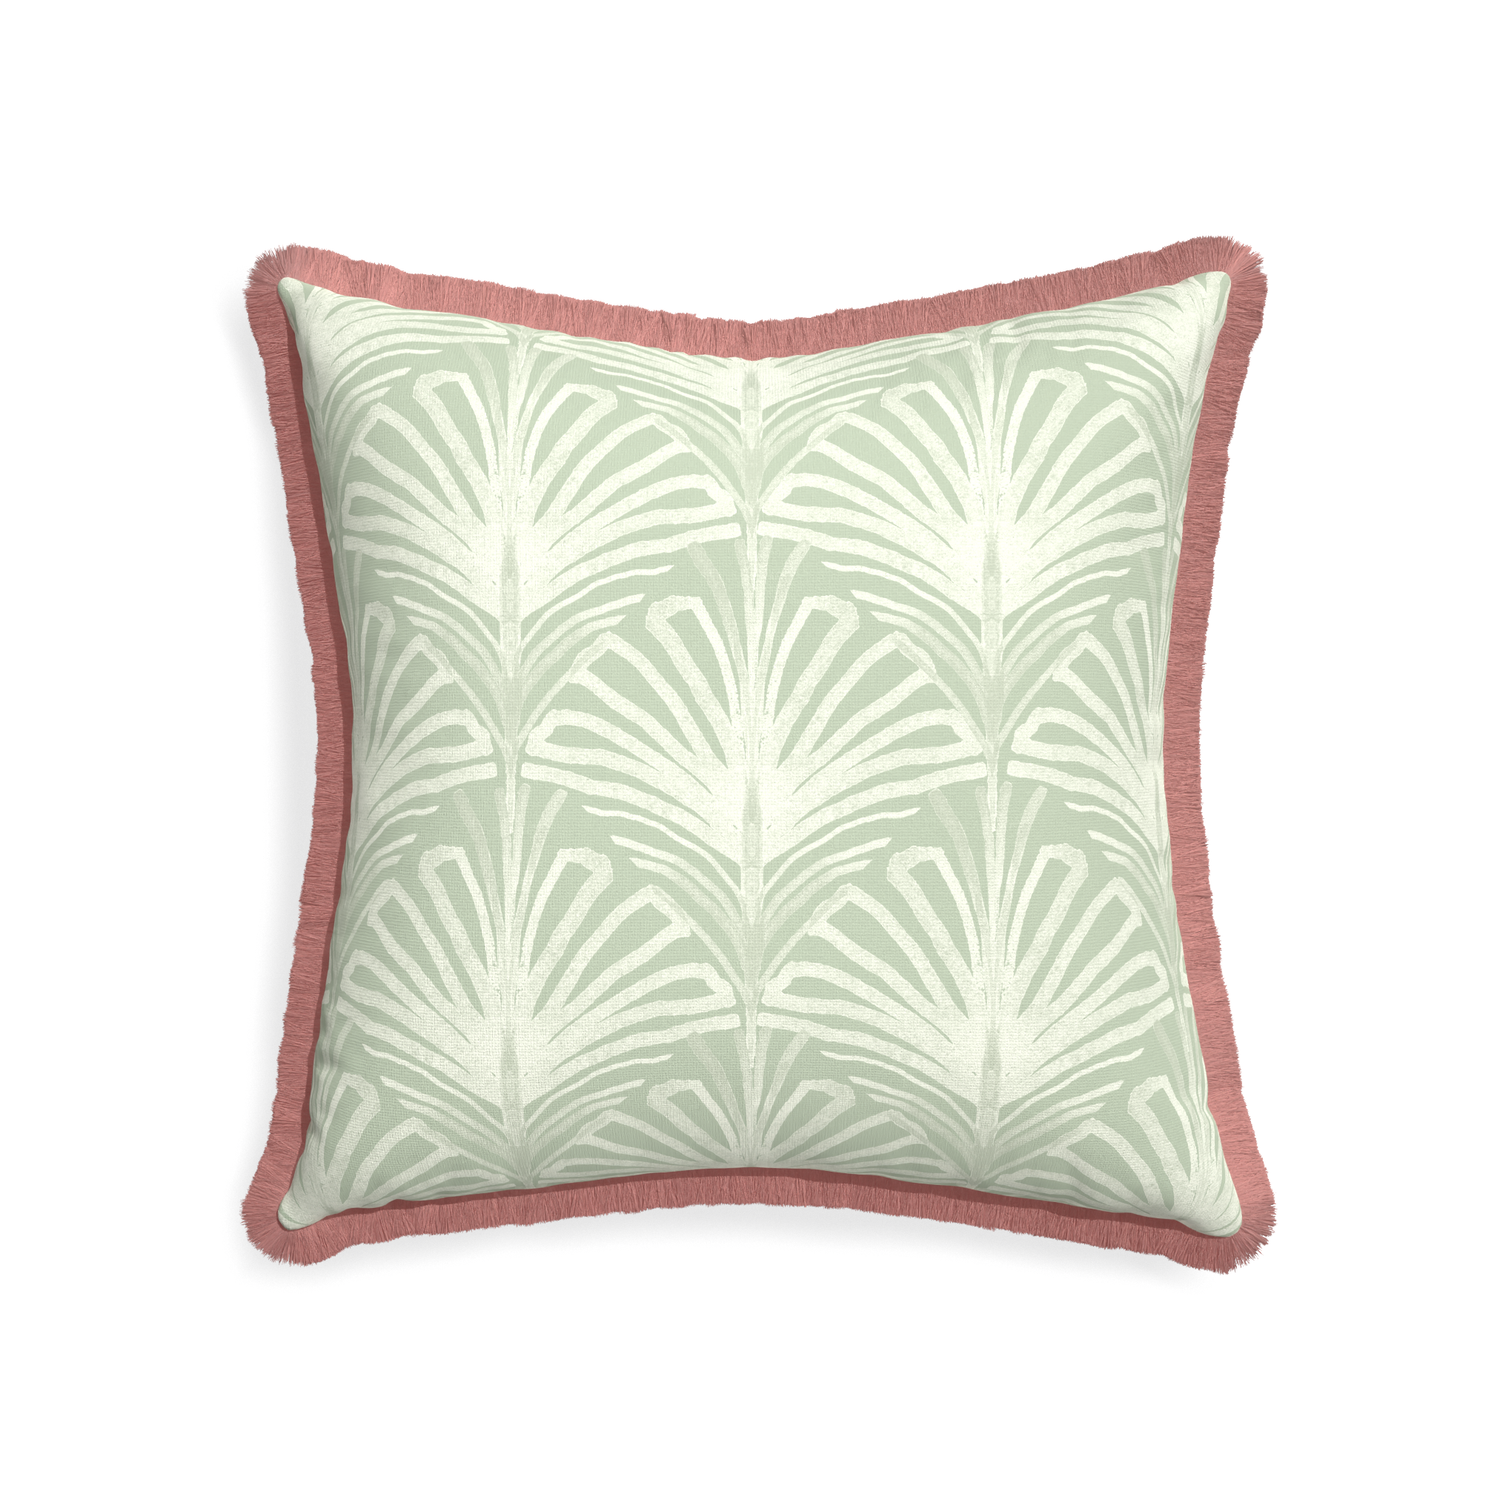 22-square suzy sage custom pillow with d fringe on white background